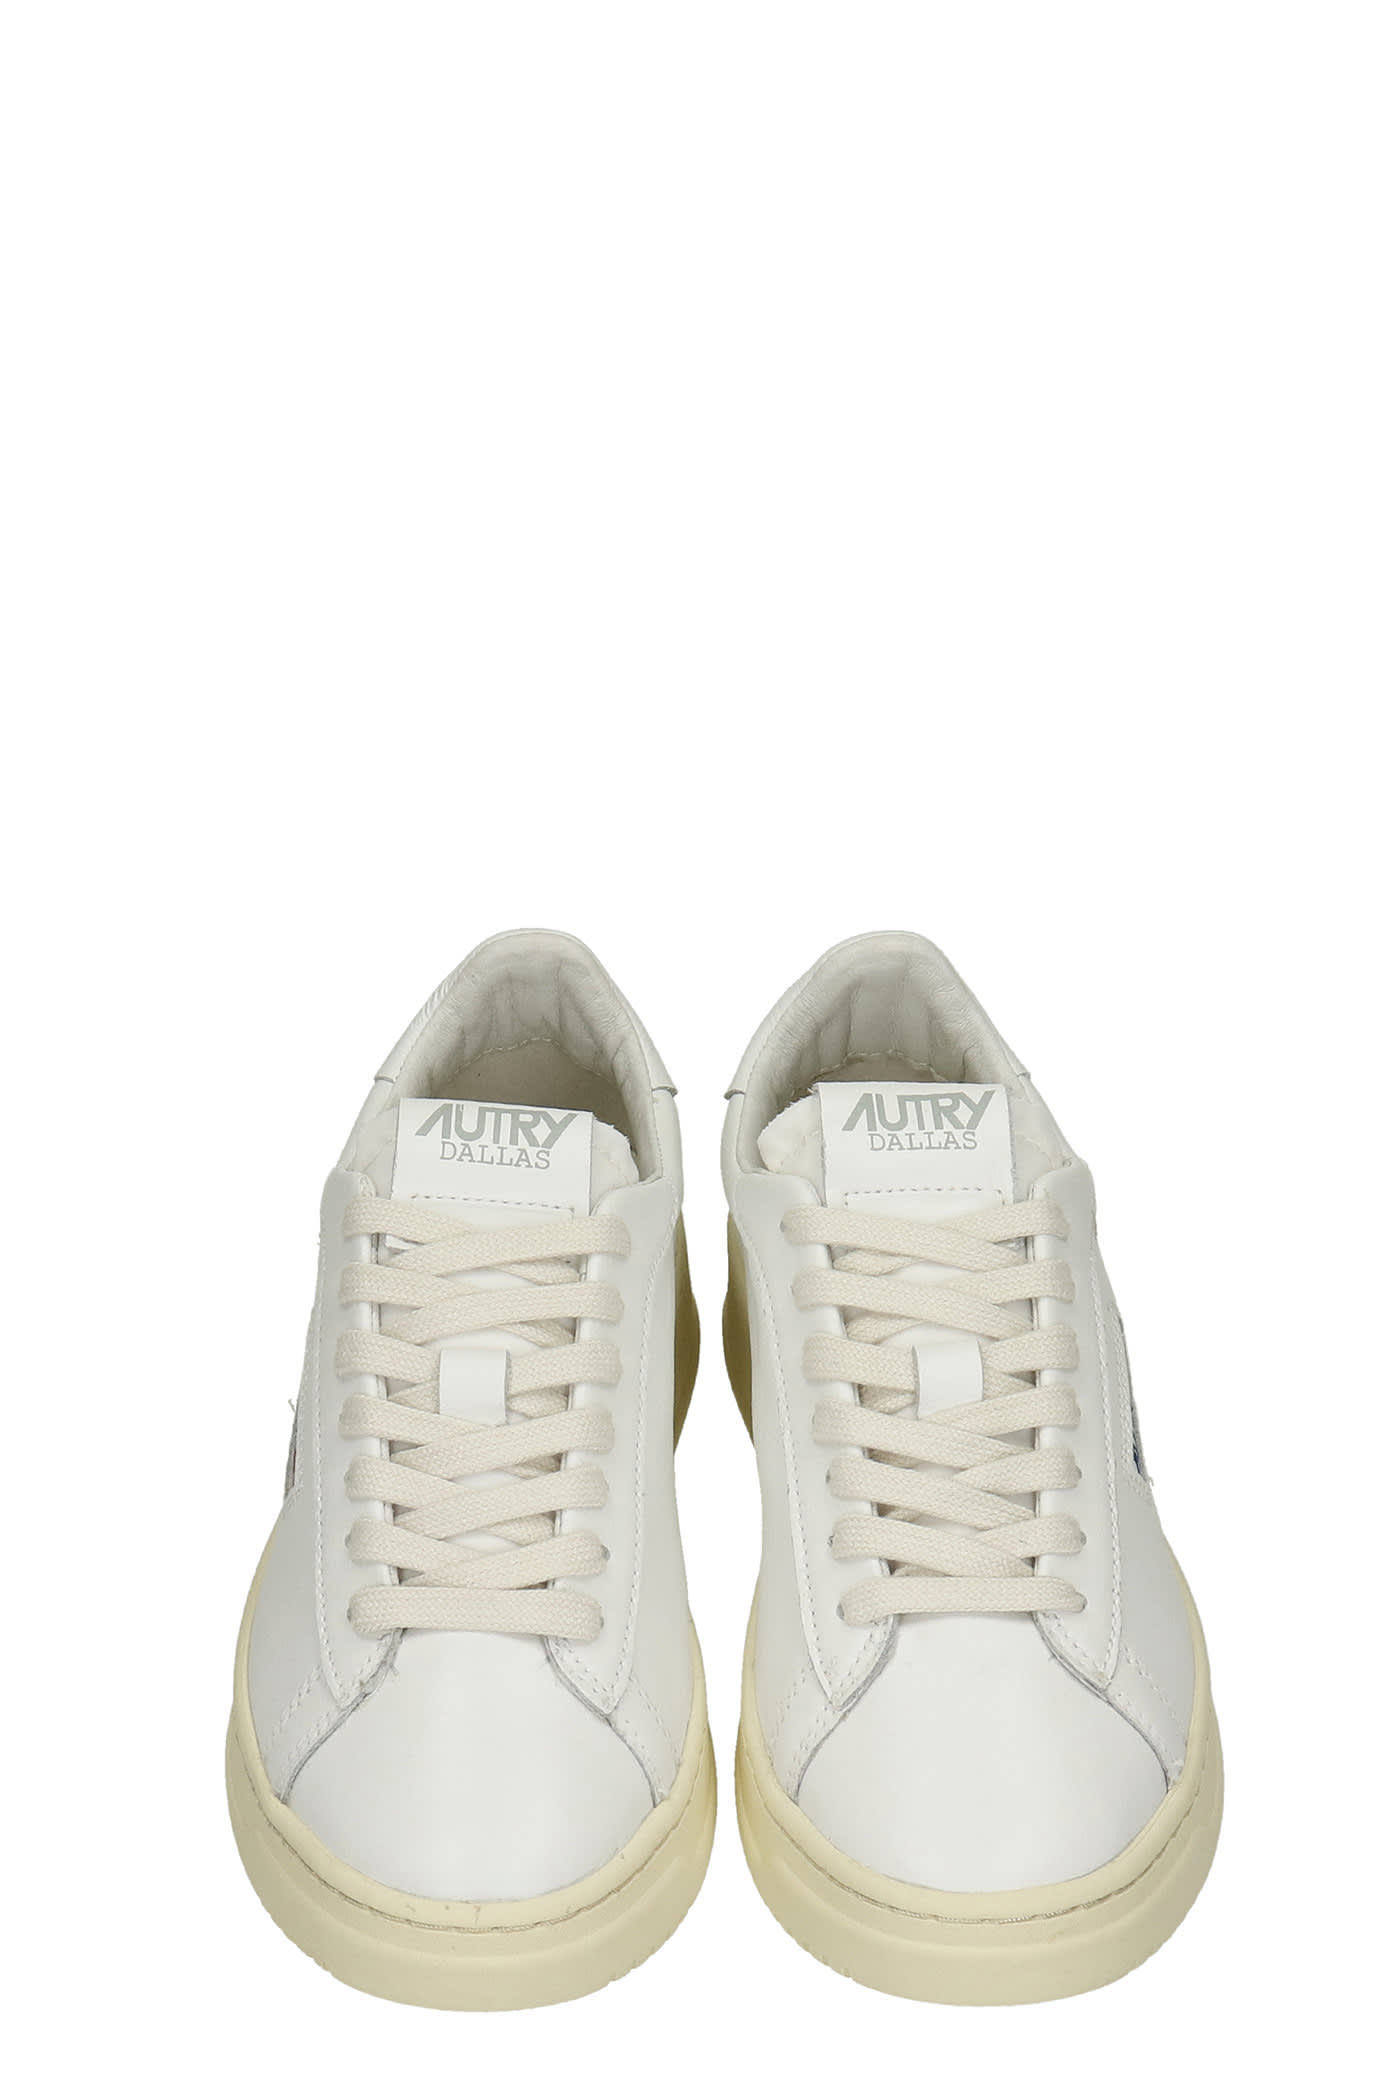 Shop Autry Dallas Sneakers In White Leather